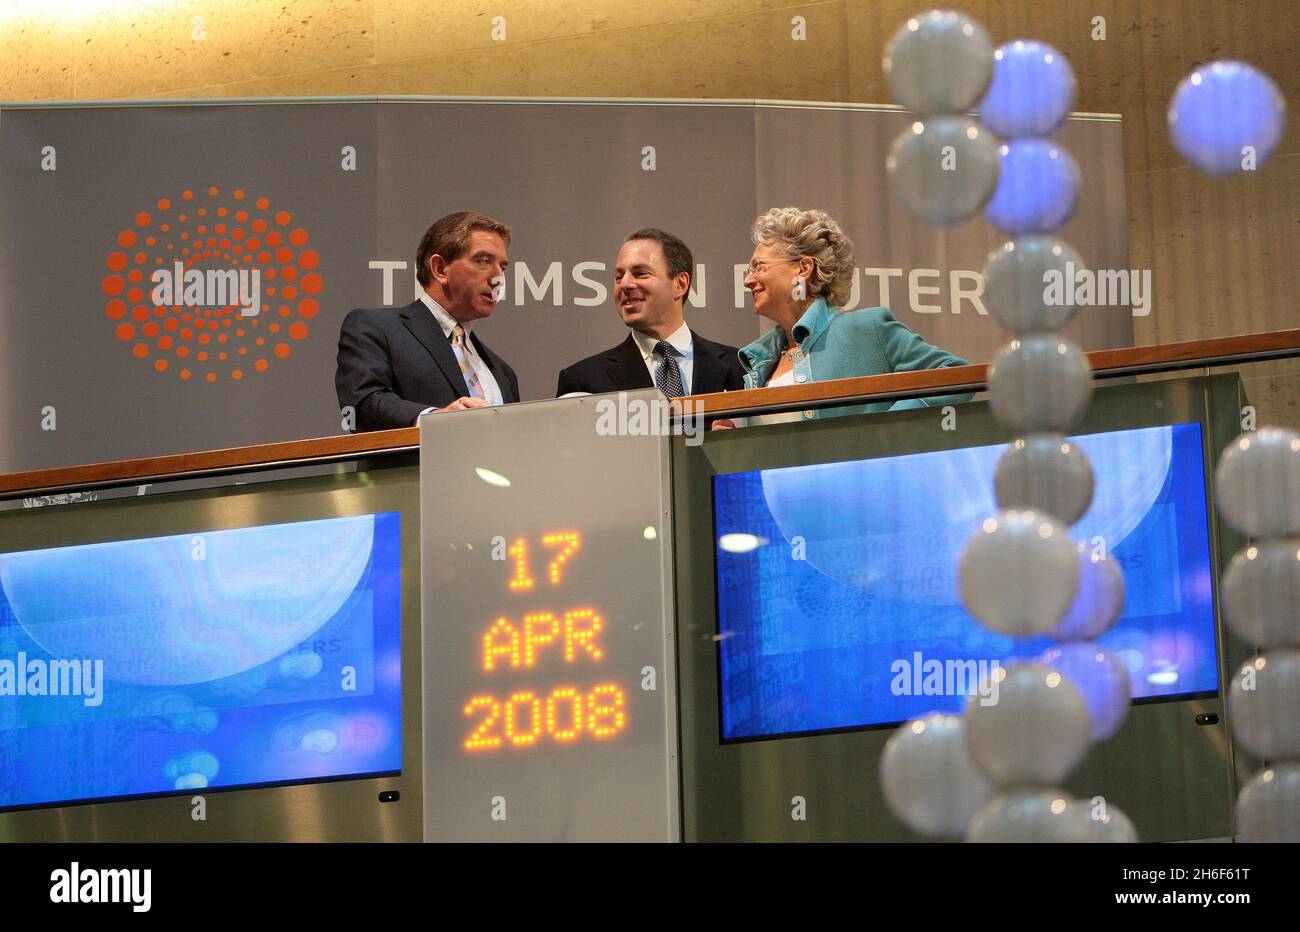 Deputy Chairman of Thomson Reuters, Niall FitzGerald (L), Chief Executive Officer Devin Wenig of Markets Division Thomson Reuters and Chief Executive Officer of the London Stock Exchange Clara Furse, as shares in the newly merged Thomson Reuters information company debuted on the London Stock Exchange this morning. The combined Thomson-Reuters Corp will compete directly with Bloomberg in financial news and information, with each commanding about a third of the market. Thomson Reuters has more than 50,000 employees with operations in 93 countries. Stock Photo